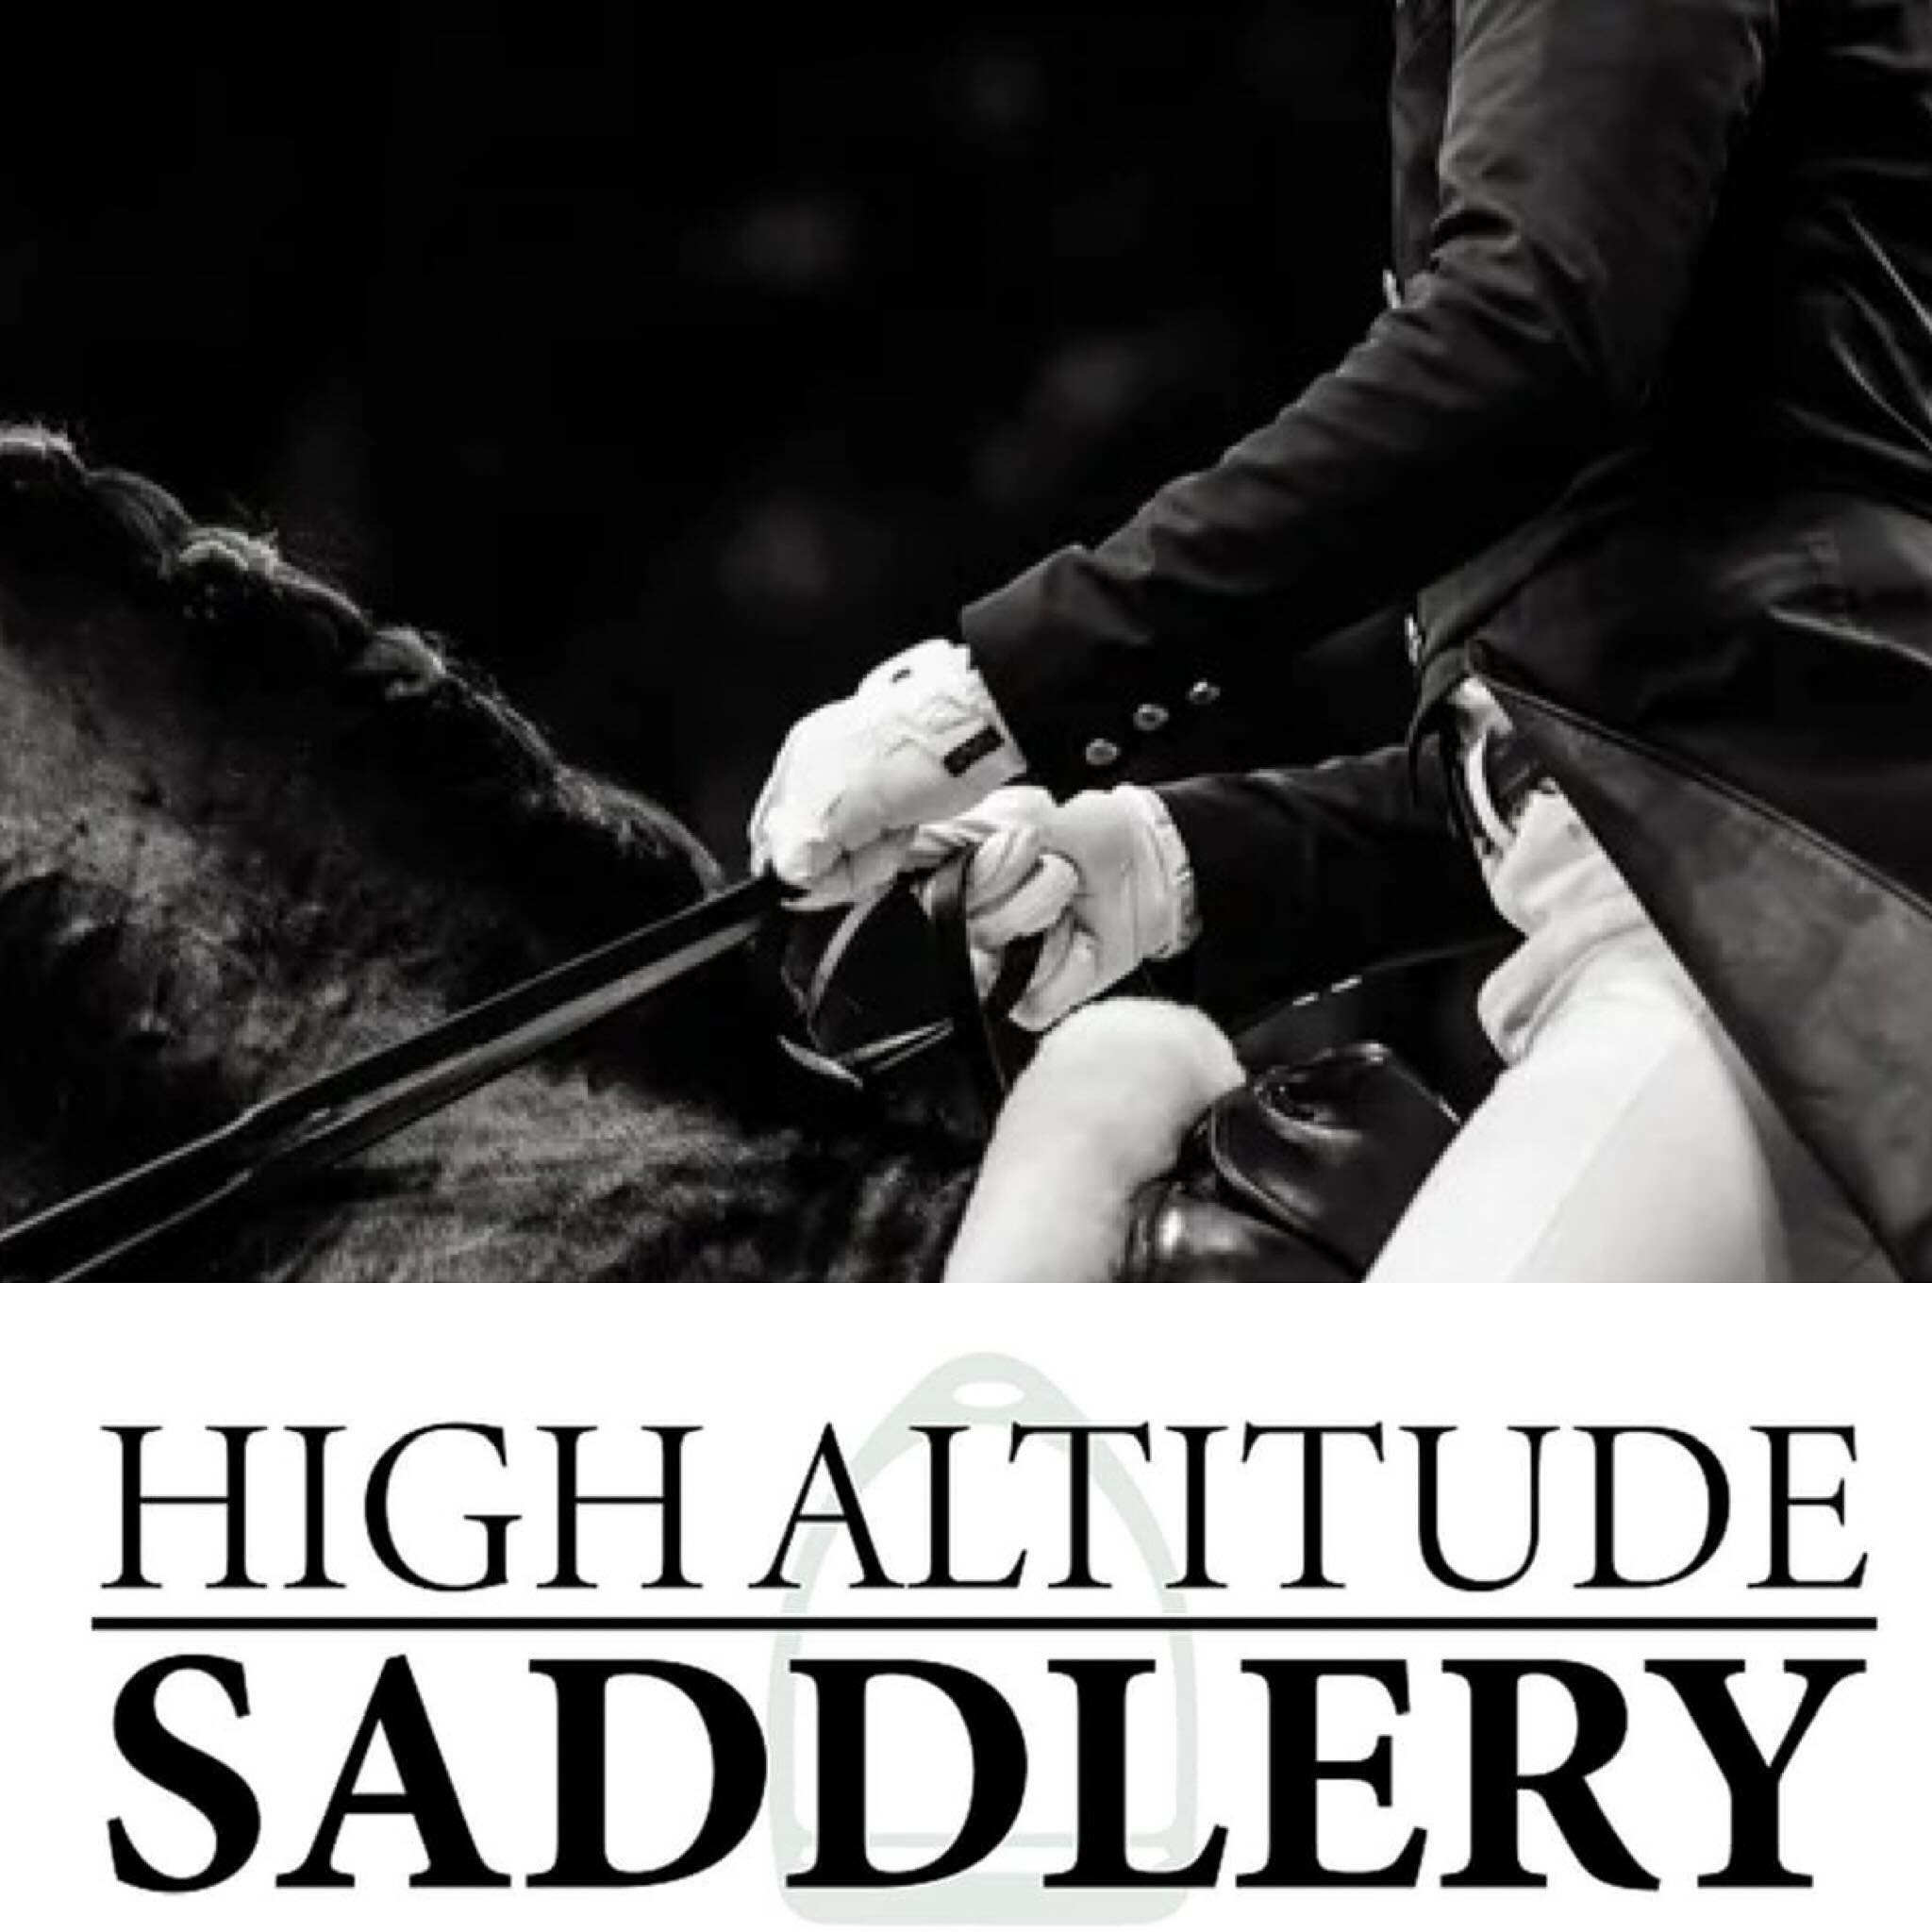 ✨SPONSOR SPOTLIGHT✨
@valgeist with High Altitude Saddlery is once again sponsoring the lowest dressage score with a beautiful cooler from @blissoflondon ! Val will also be on-site on Saturday for saddle fittings and selling lots of new and used high-